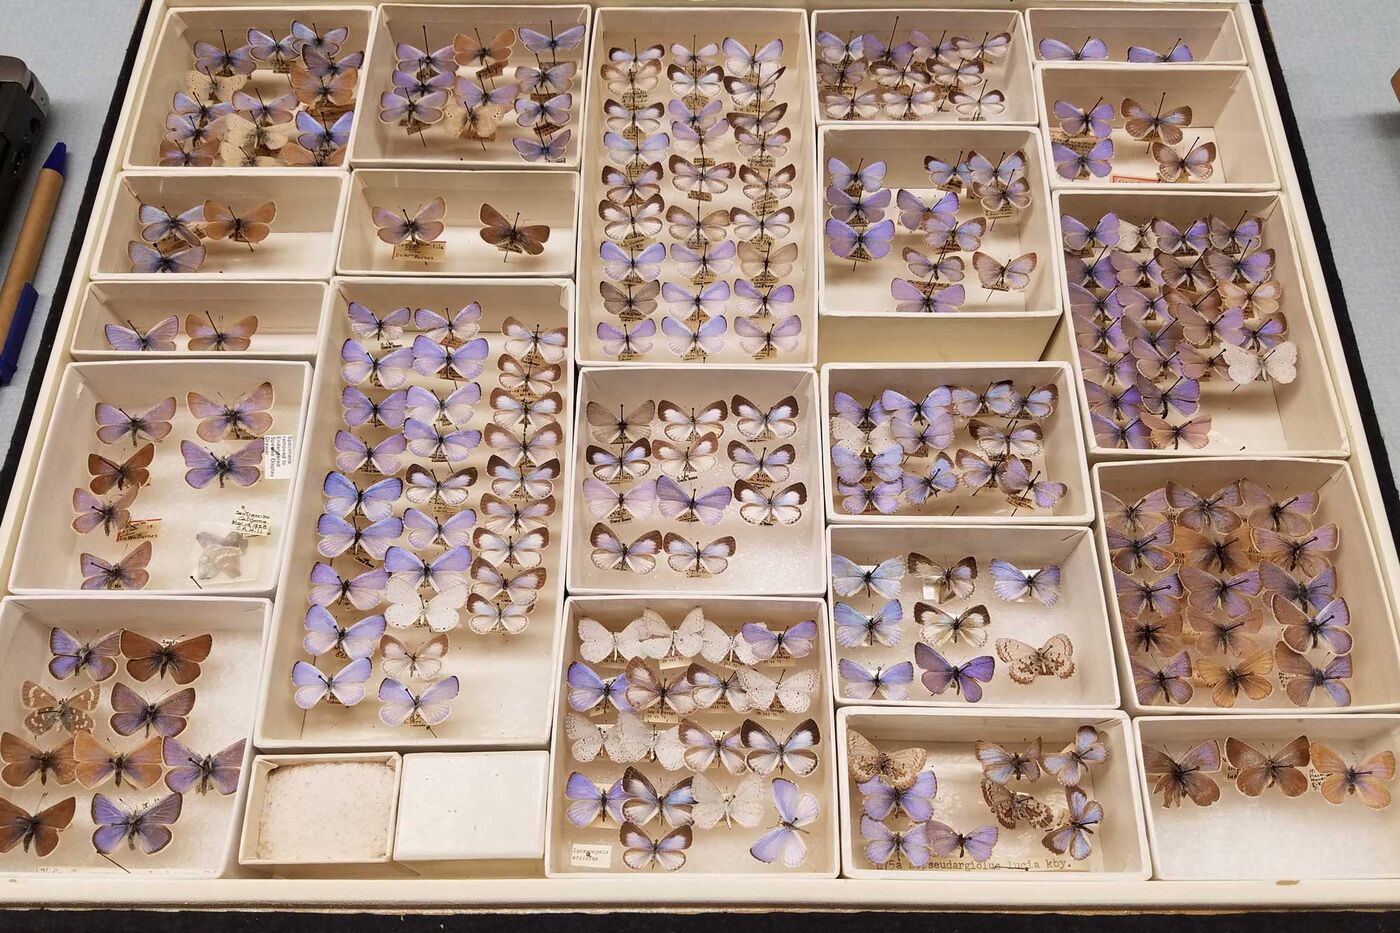 A collections drawer full of small bluish-purple pinned butterfly specimens. 